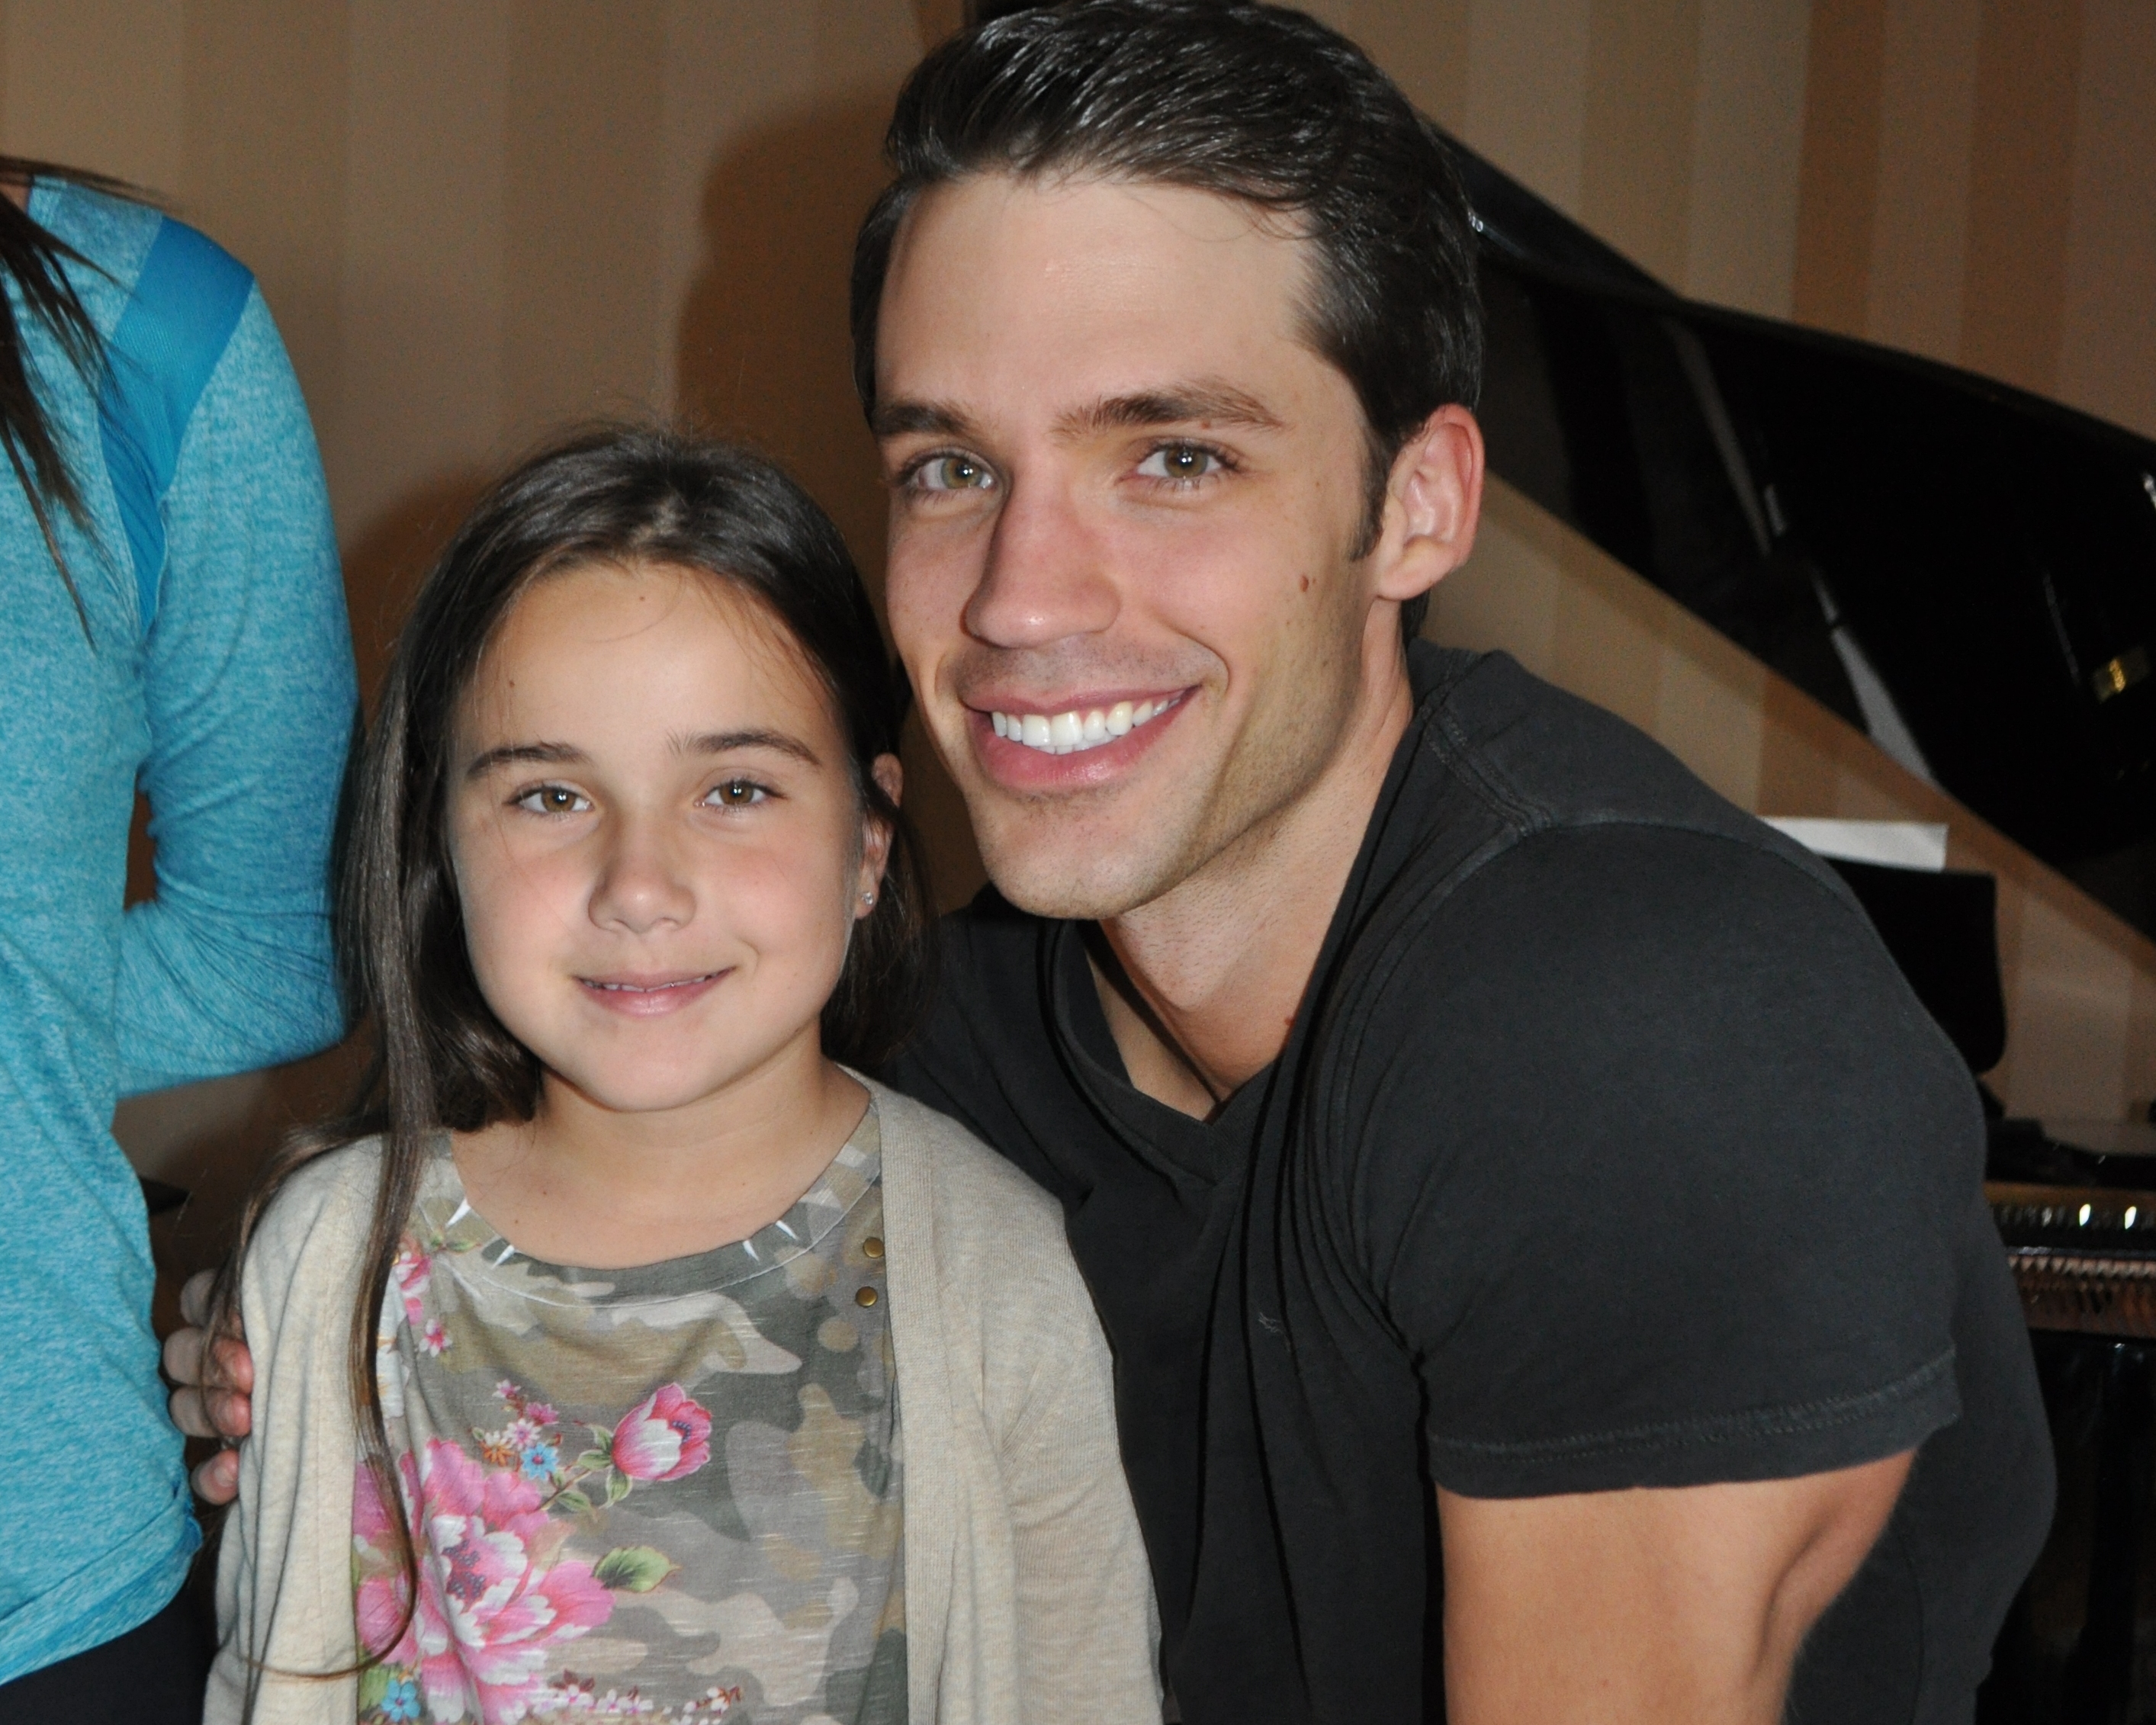 Emily Grace Ranieri and David Gregory on the set of 